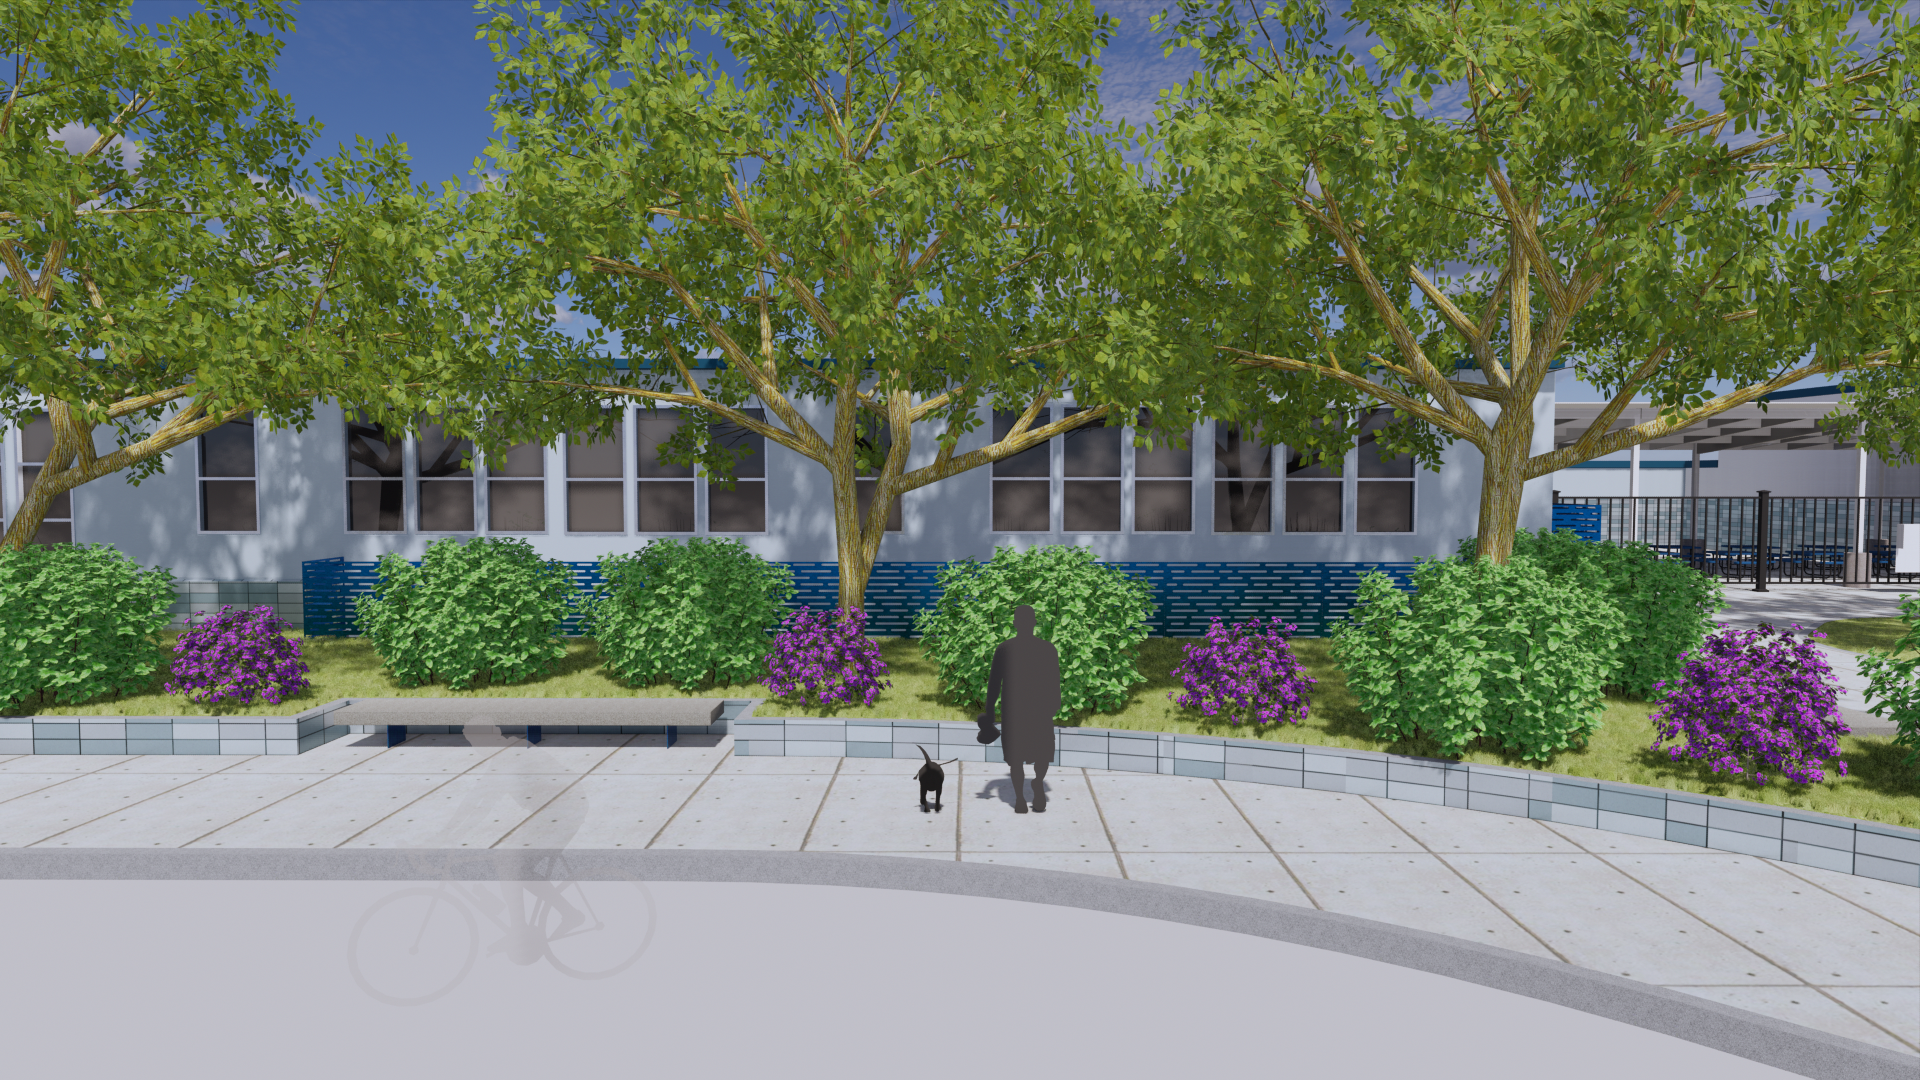 Render of Waterford Junior High School front facade, highlighting landscaping and metal panel walls.